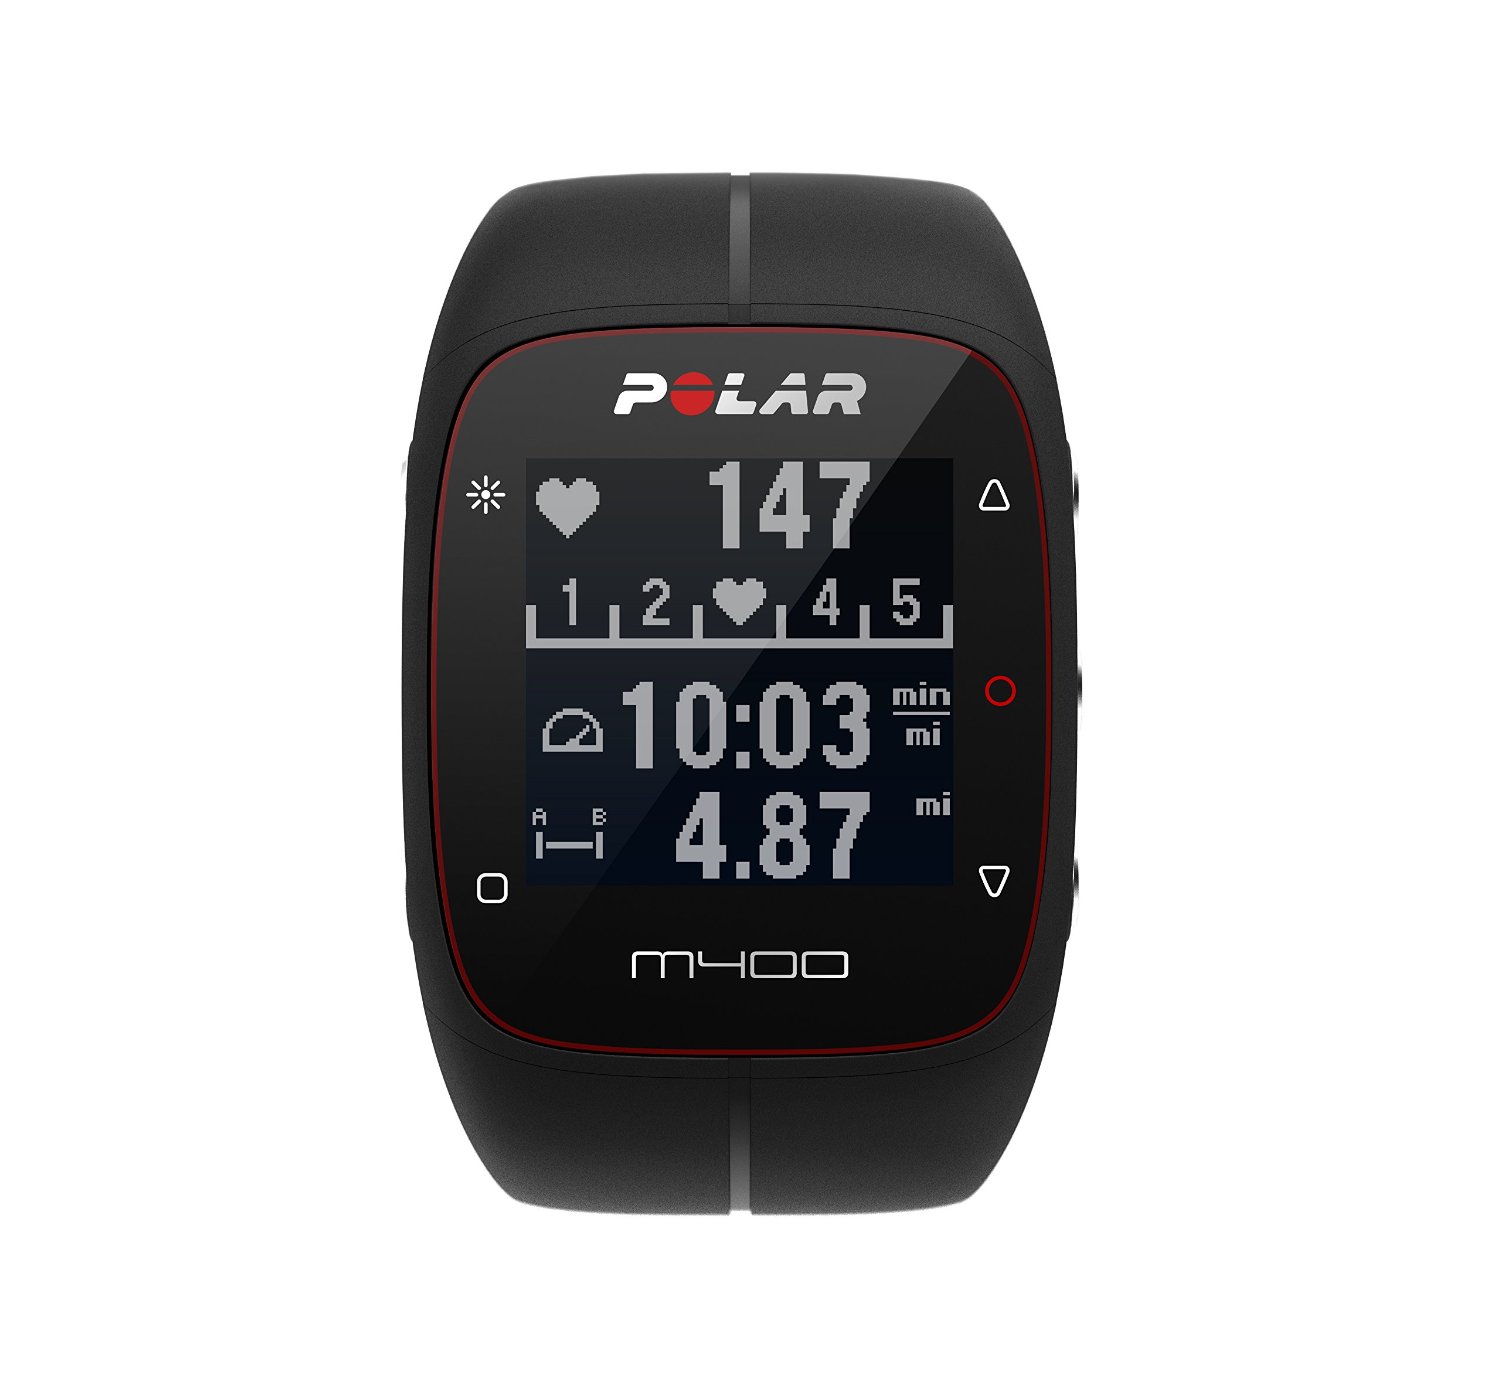 gps watch, running watch, fitbit, fitness tracker, activity tracker, fitbit surge, polar m400, fitbit alternatives, fitbit competitors